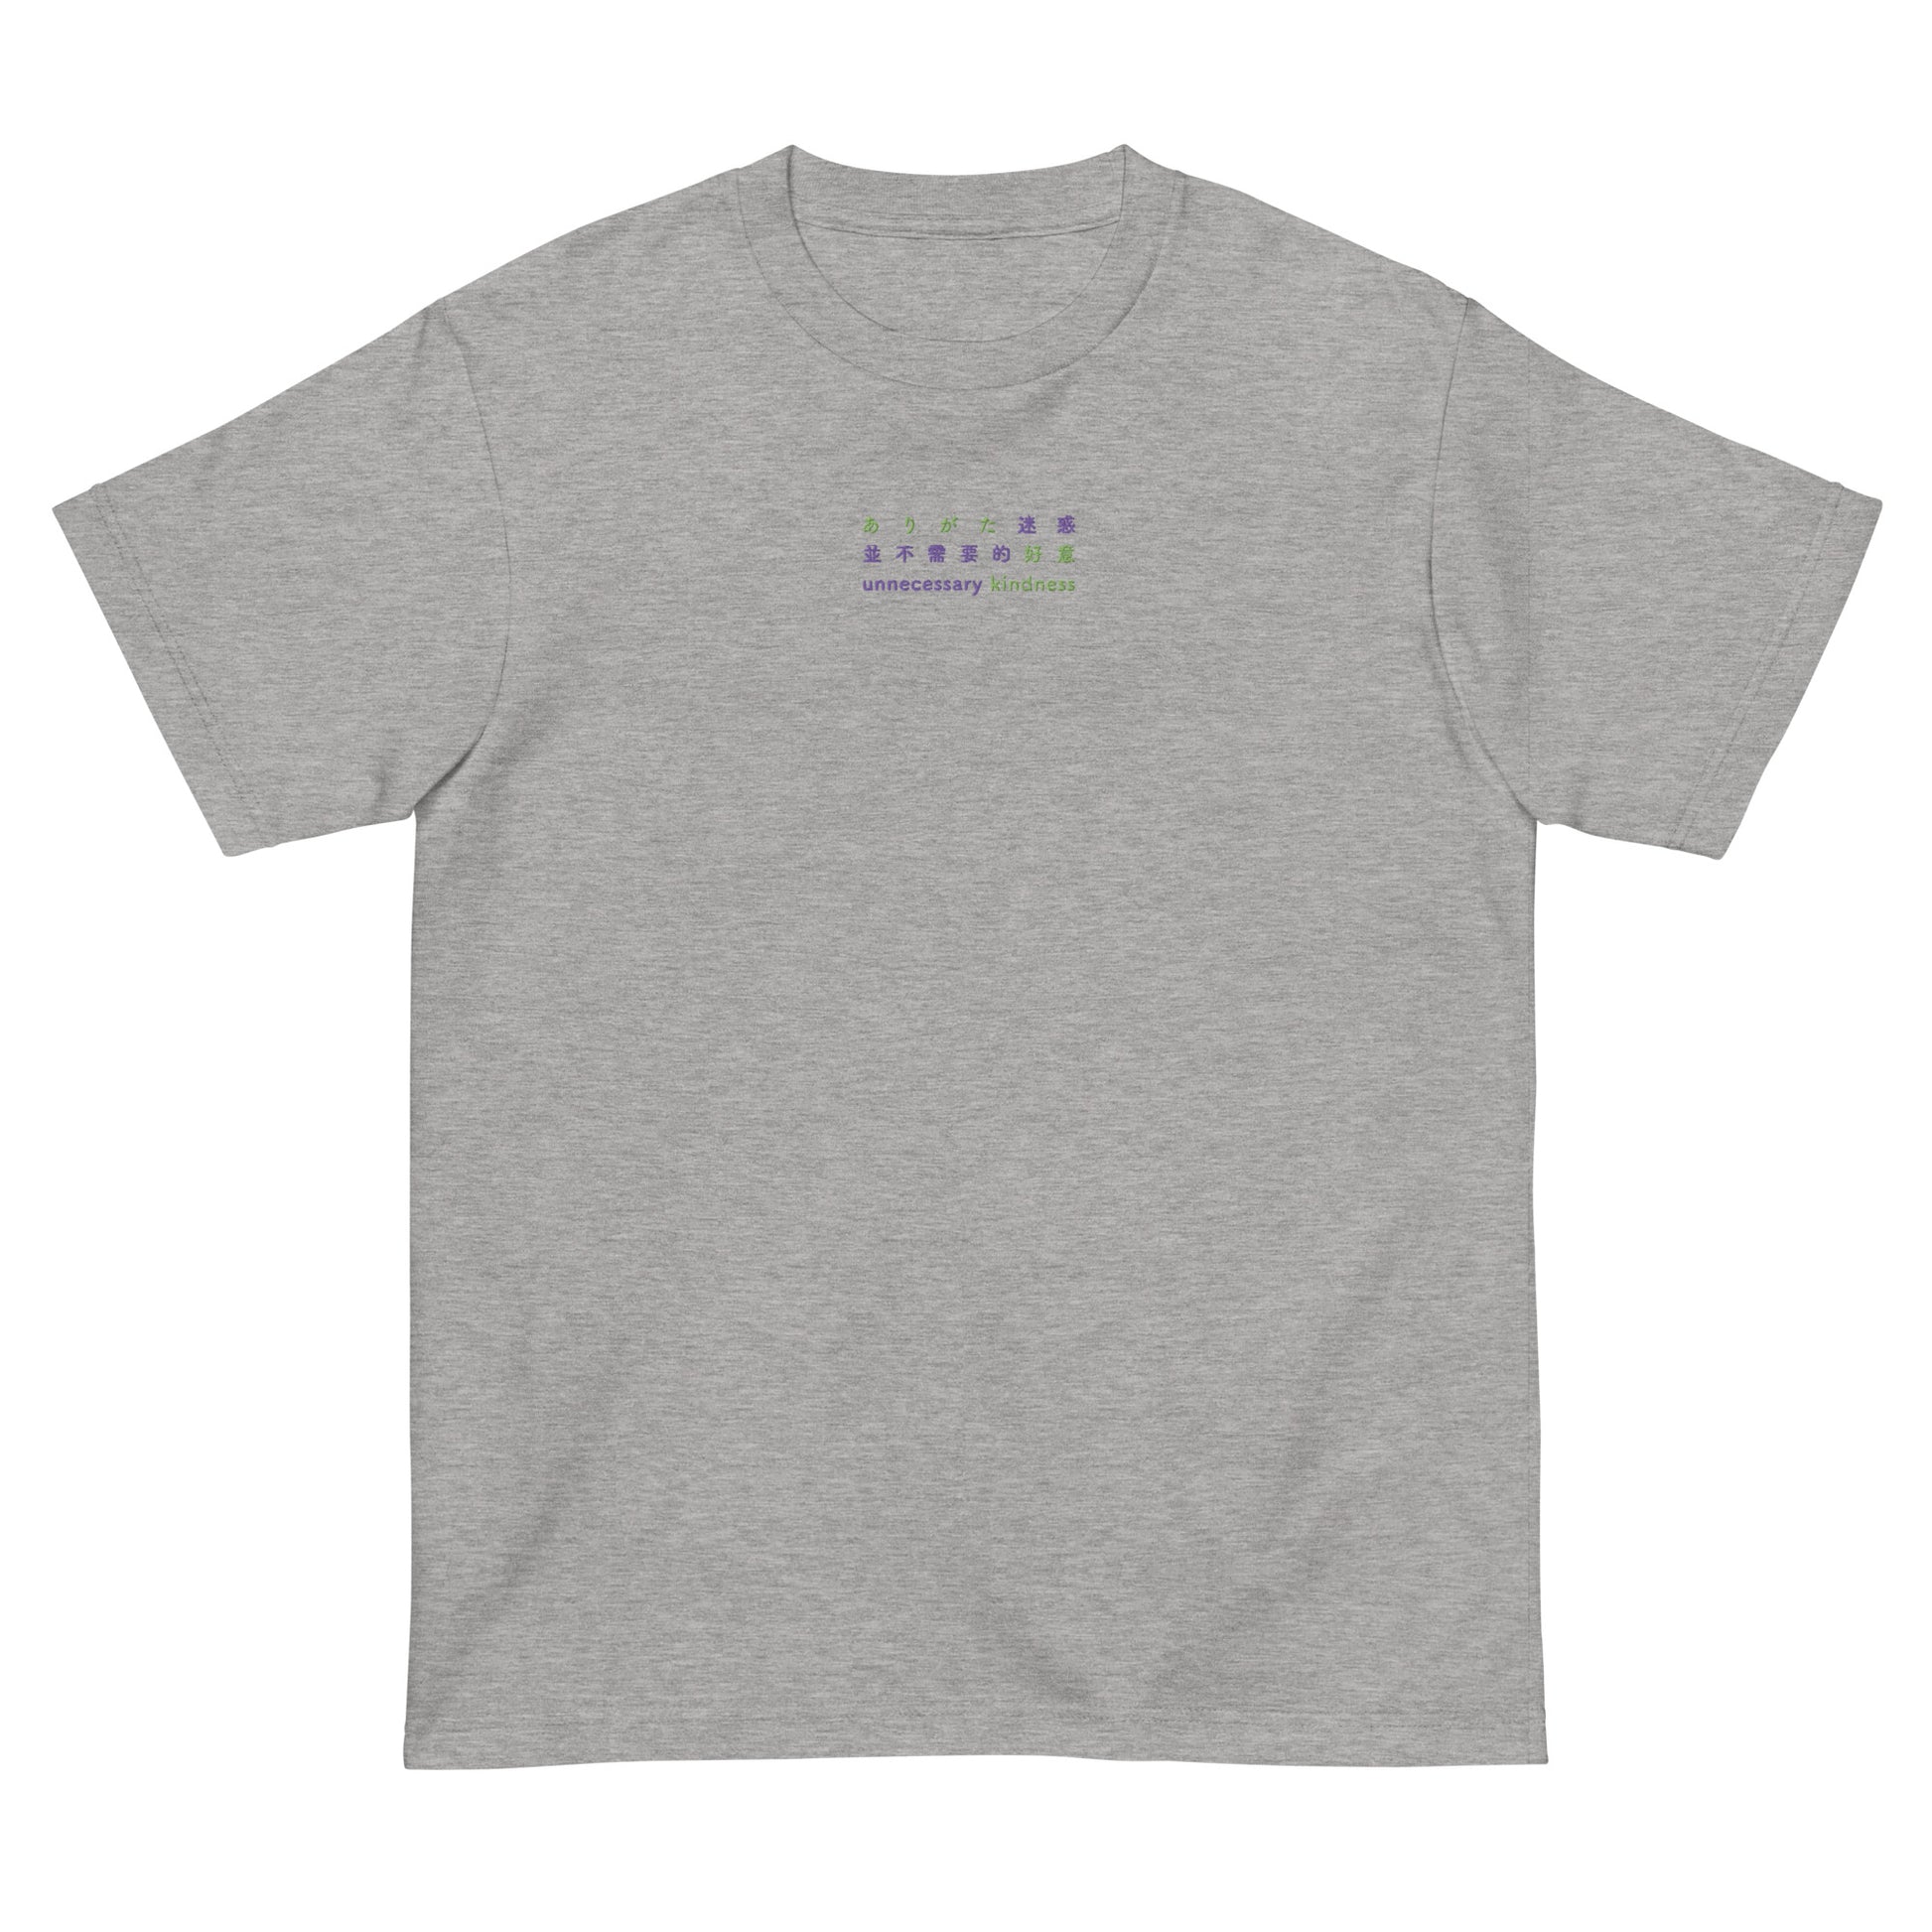 Light Gray High Quality Tee - Front Design with Green and Purple Embroidery "Unnecessary Kindness" in Japanese ,Chinese and English